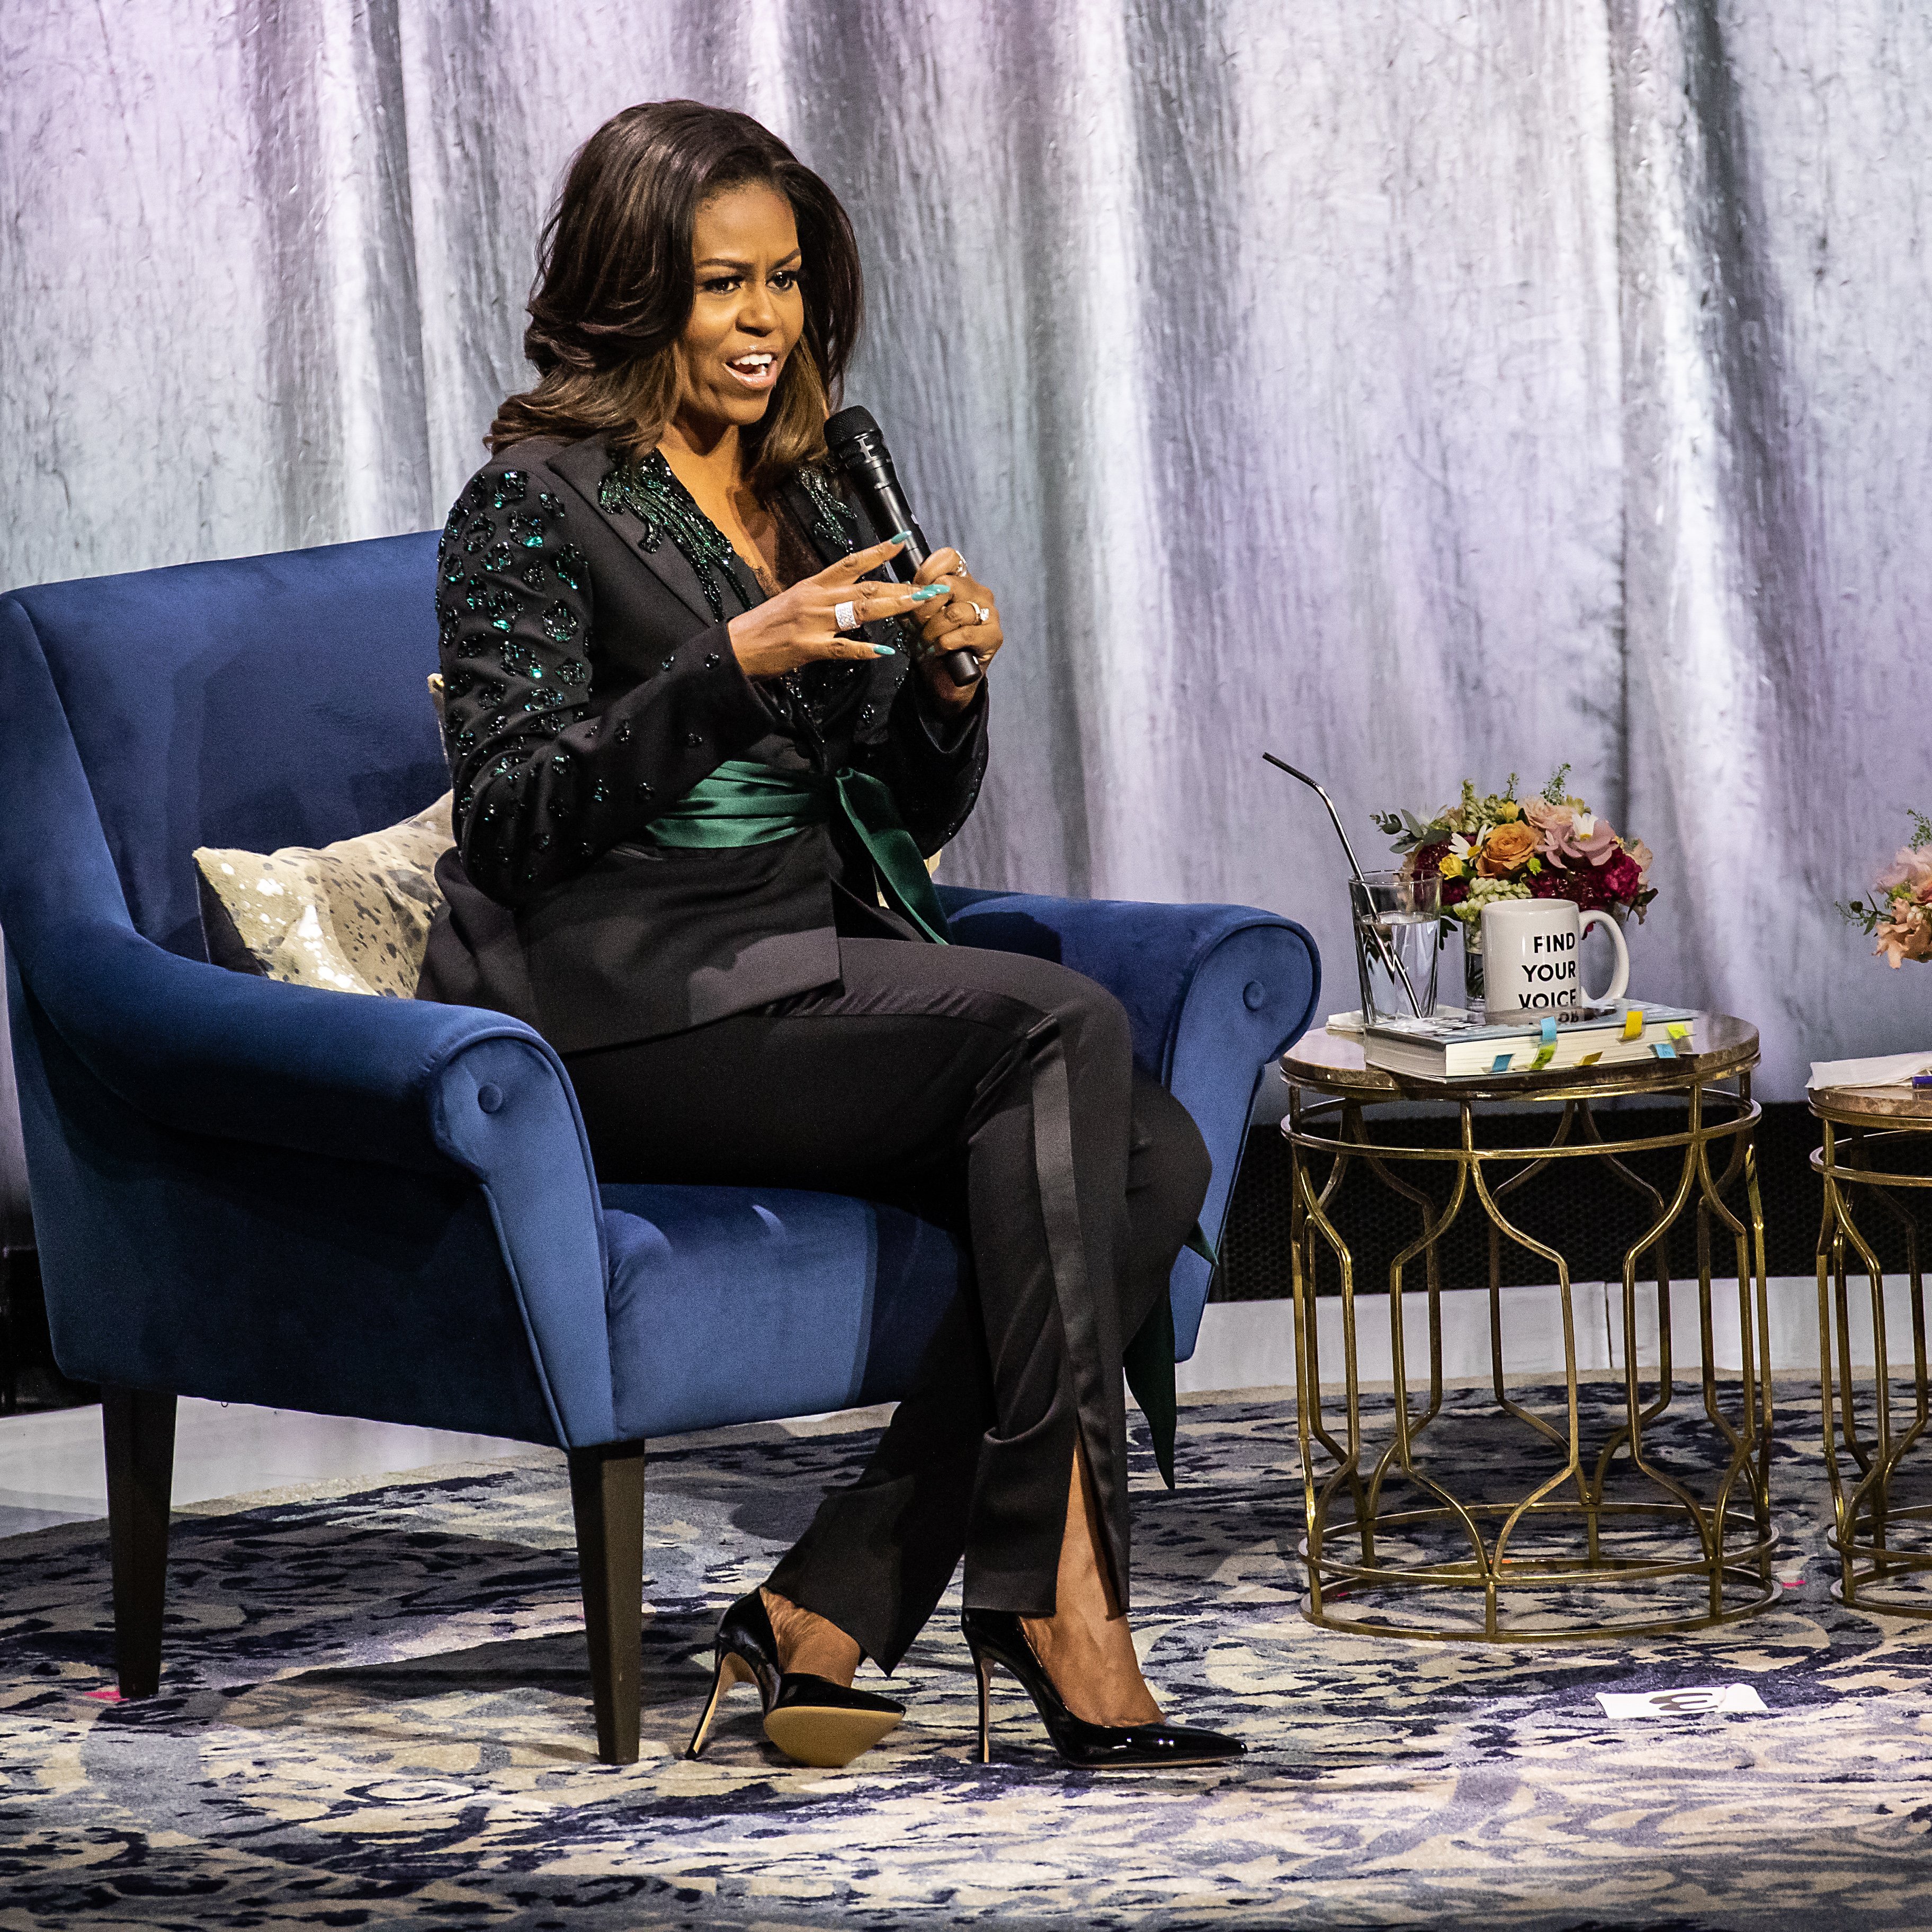 Michelle Obama held a conversation with Phoebe Robinson about her book "Becoming" at Oslo Spektrum on April 11, 2019, in Oslo, Norway. | Source: Getty Images.